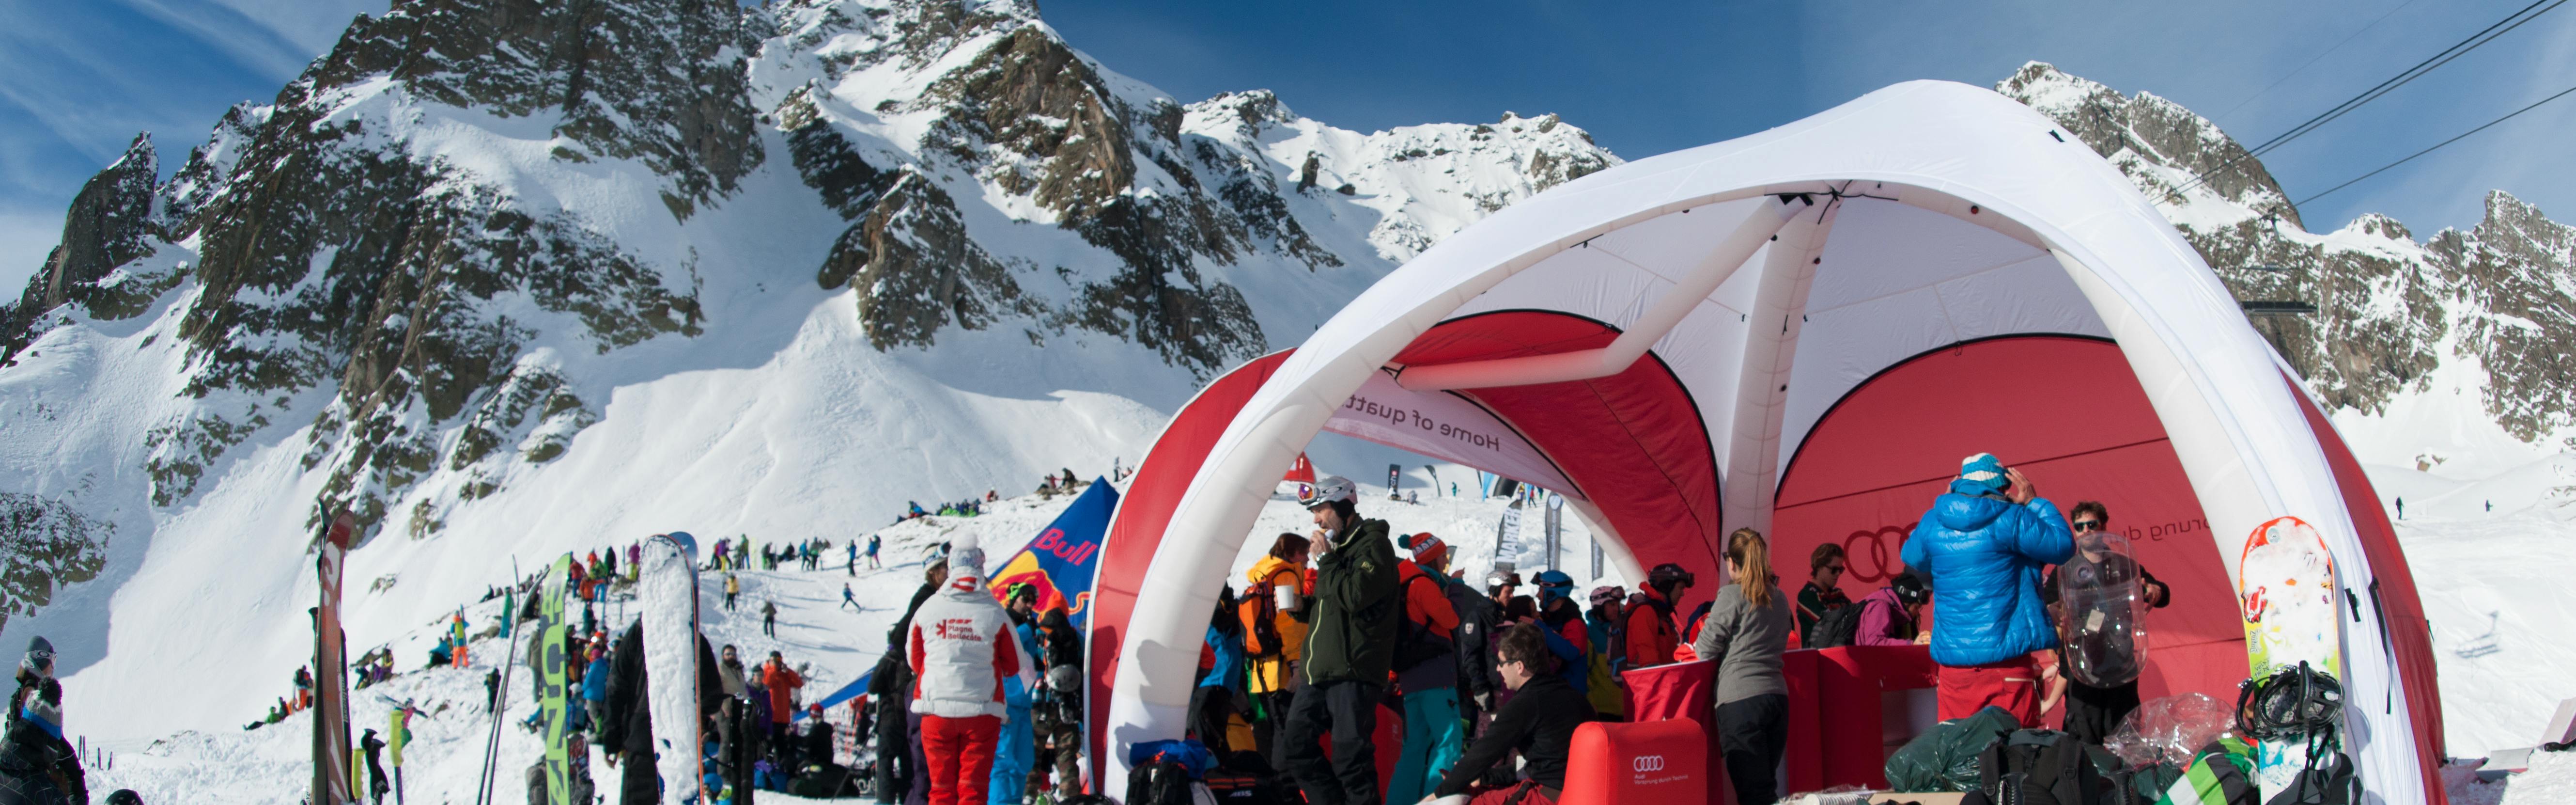 An Audi stand is set up on the snowy mountain for the Freeride World Tour. Skis stand upright in the snow and people mill about. 